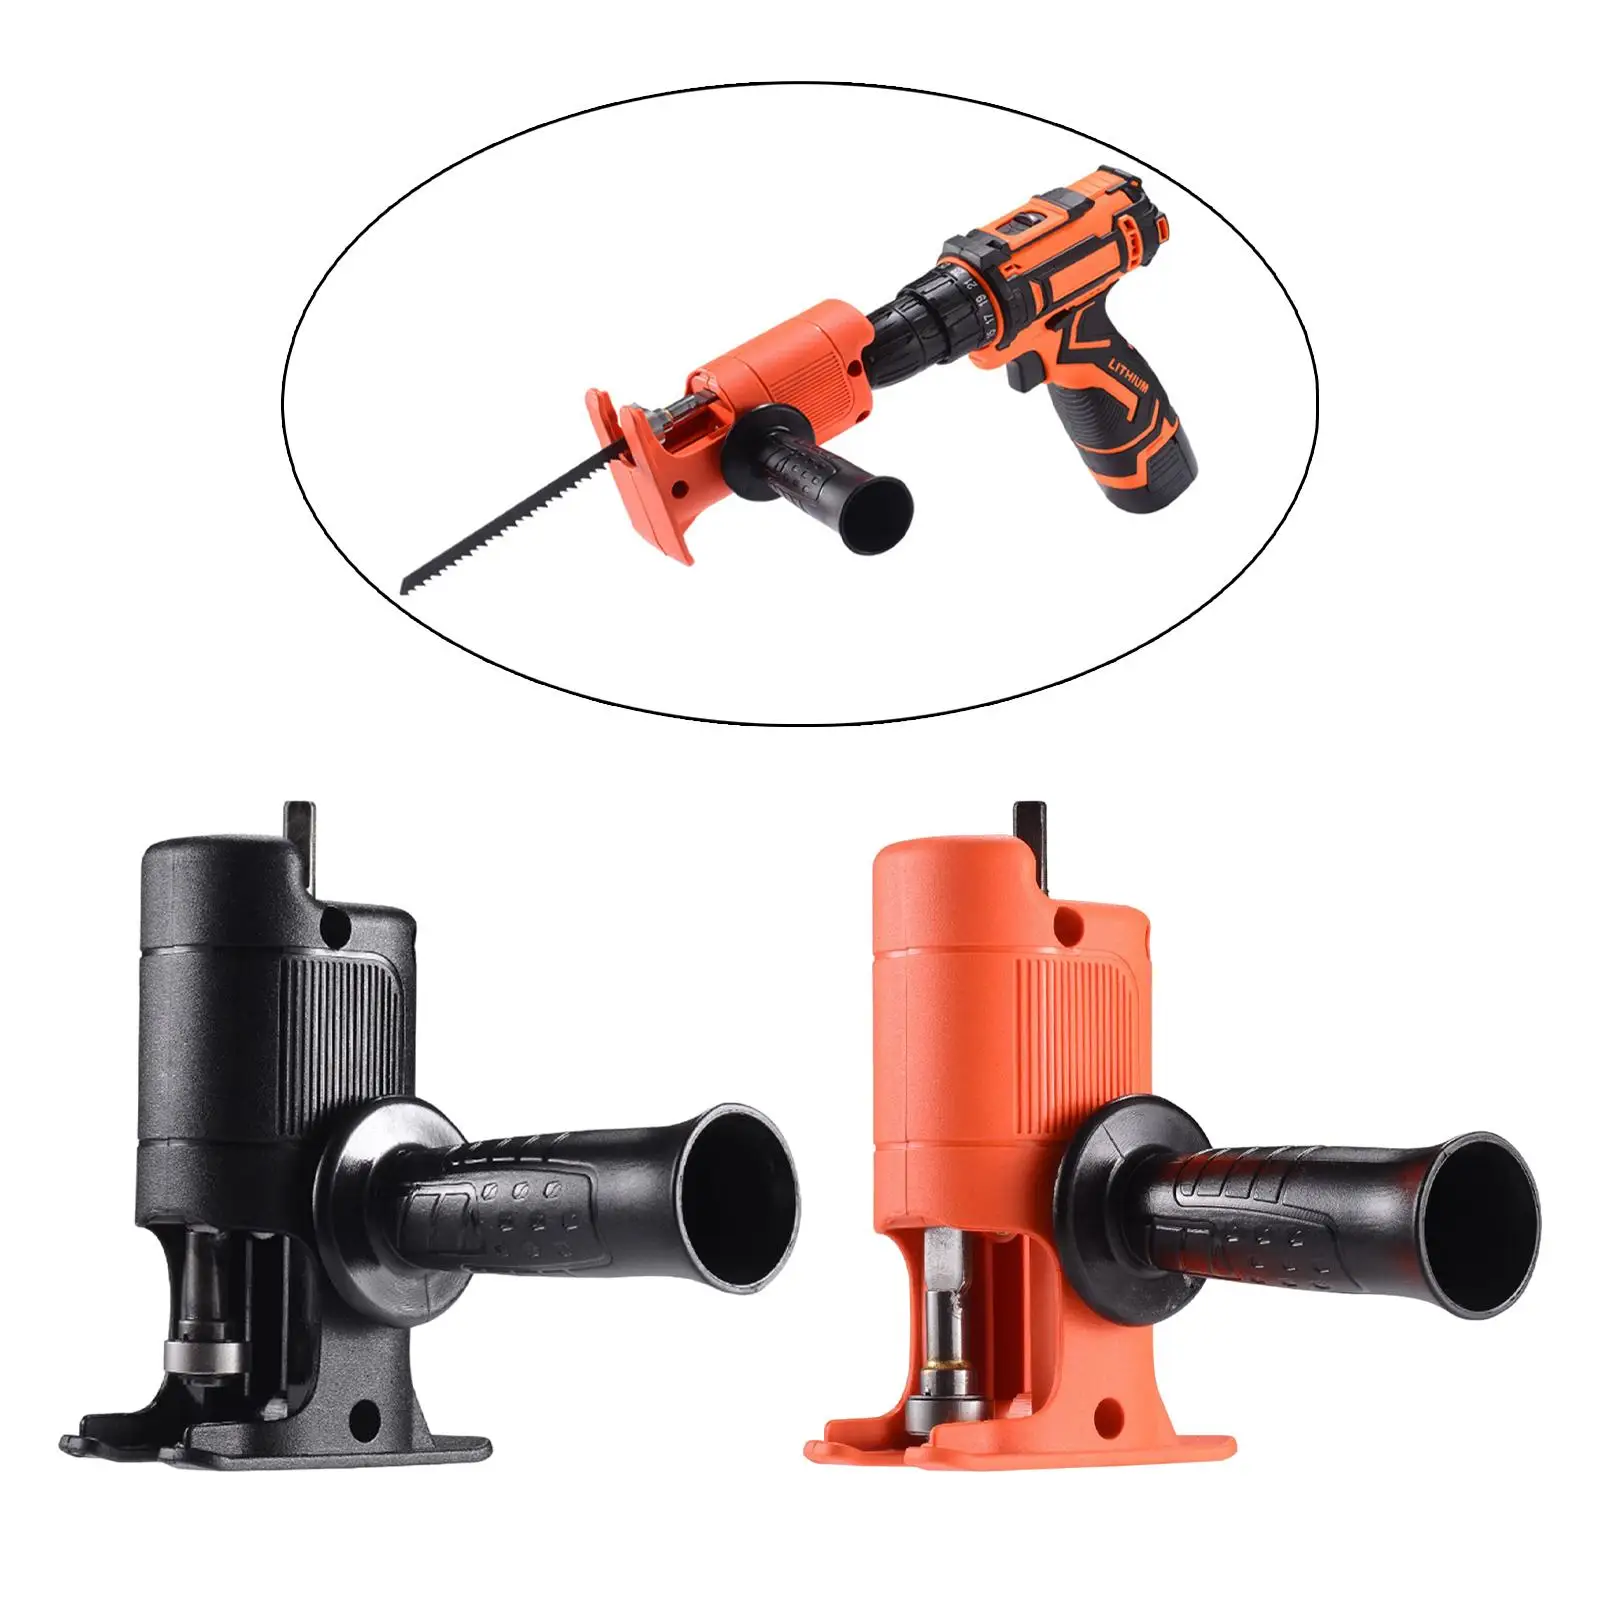 Portable Reciprocating Saw Adapter Electric Drill Modified Electric Jig Saw Power Tool Wood Cutter Machine Attachment & 3 Blades